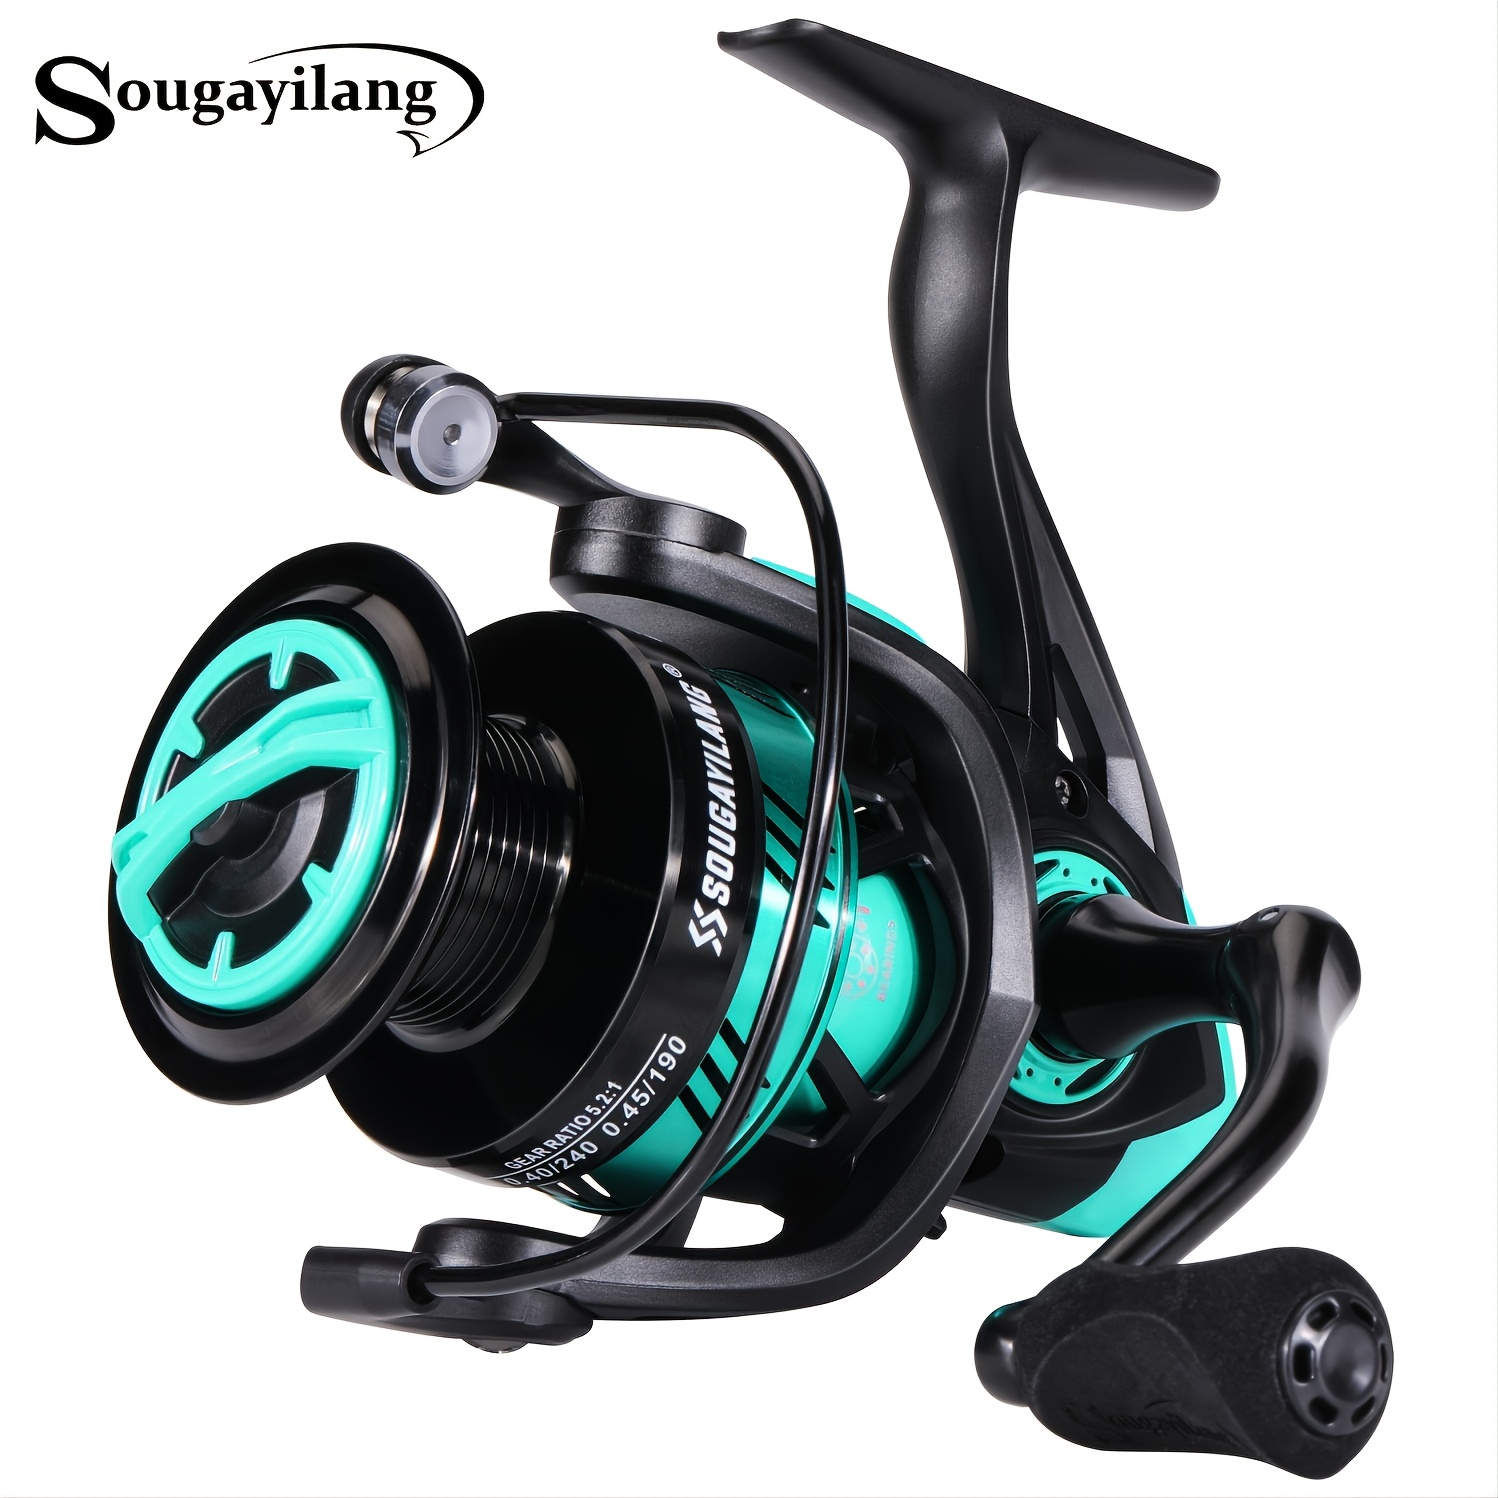 High-performance Fishing Reel With Max Drag, 5.2:1 Gear Ratio, And